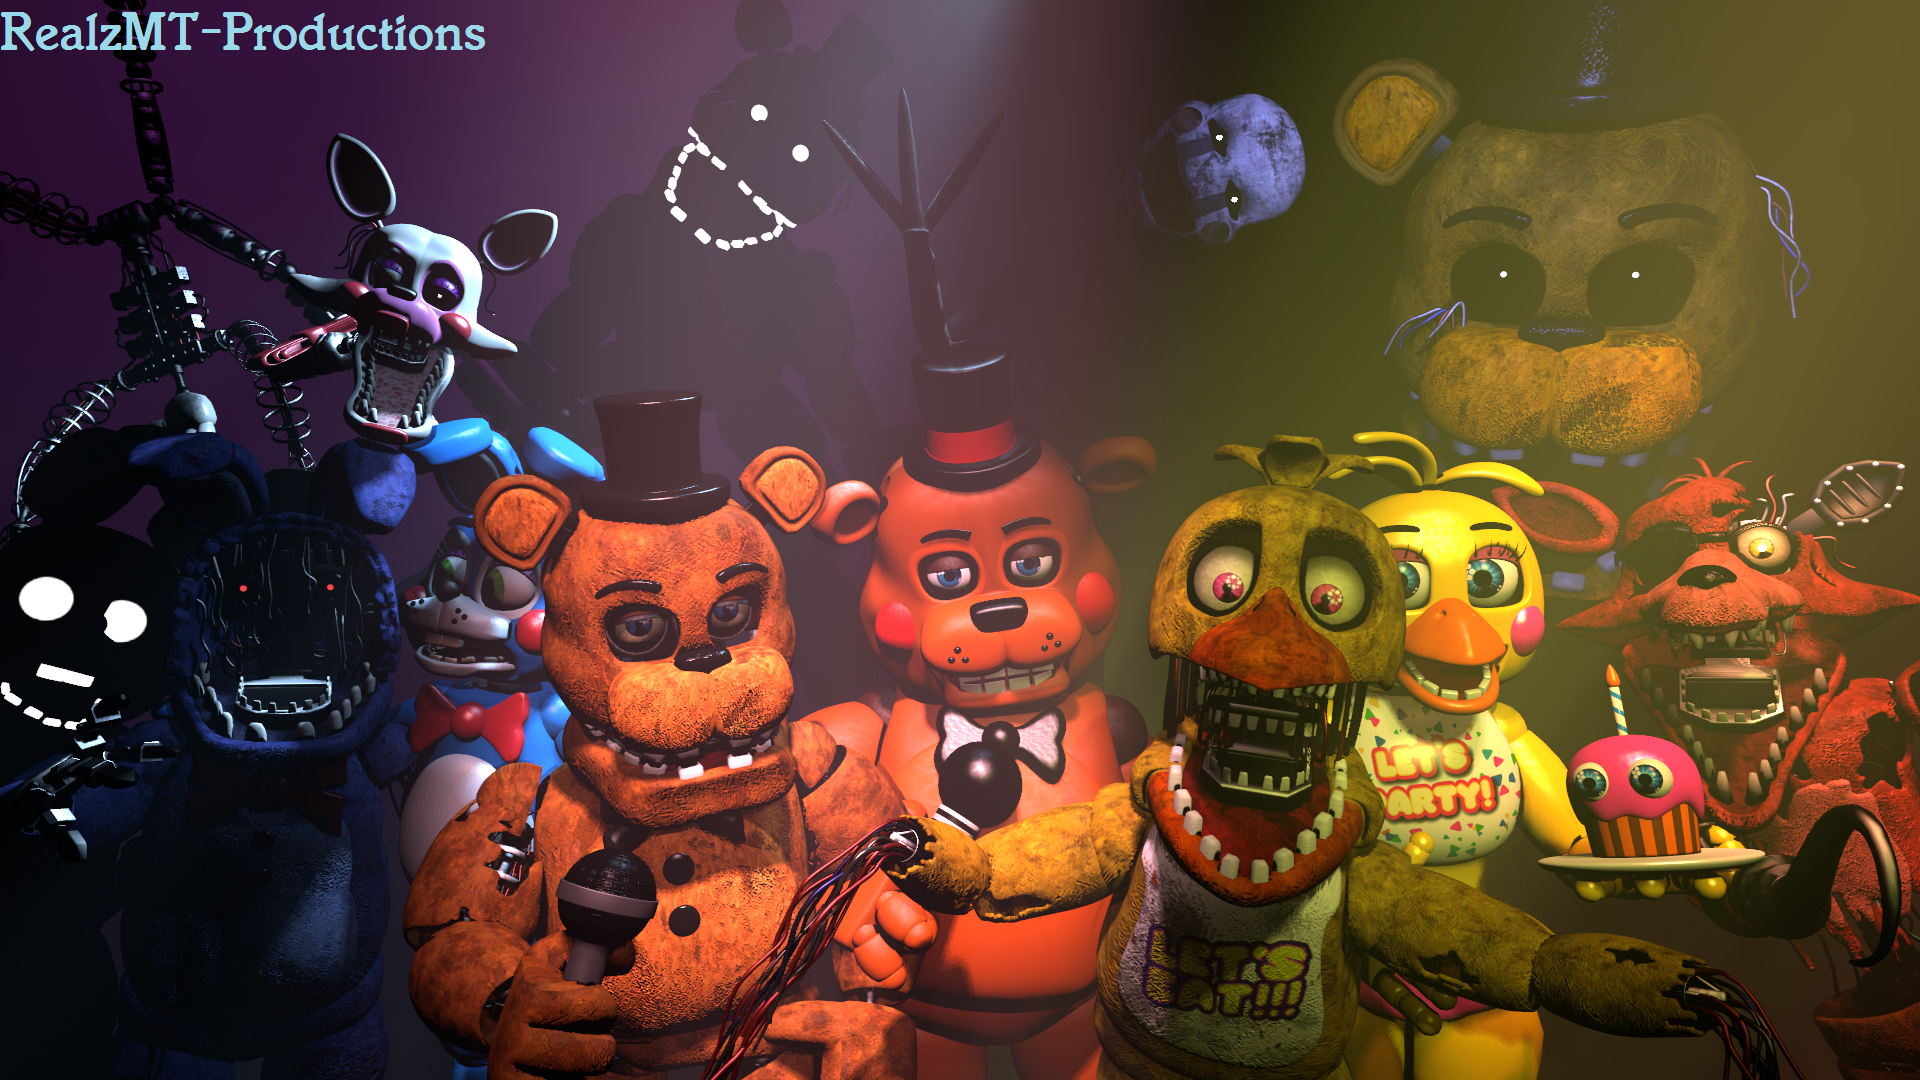 Five Nights At Freddy's 2 by Super-SpazCat on DeviantArt